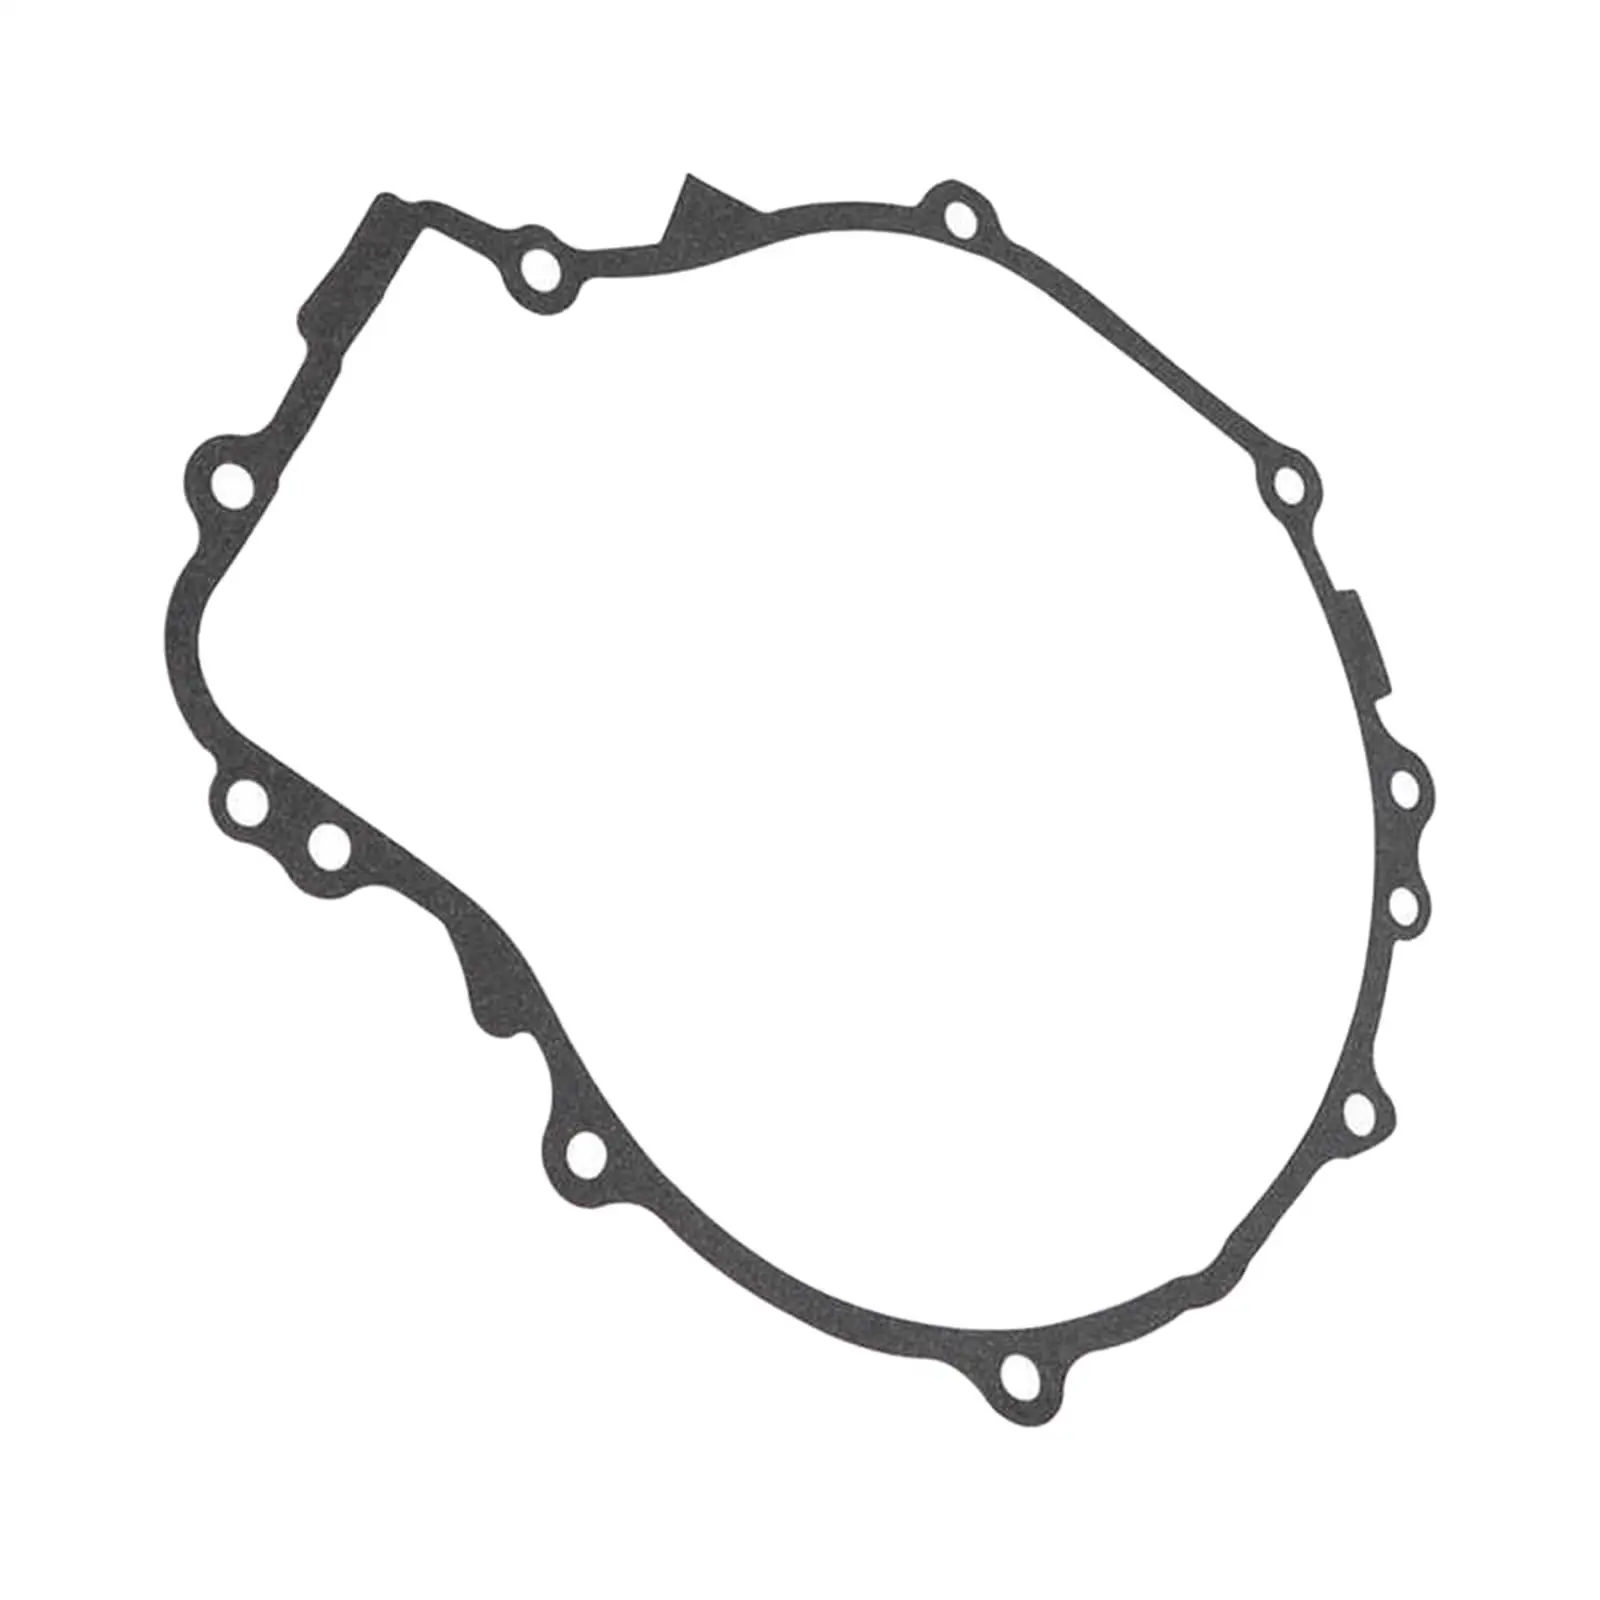 Vehicle Pull Start Gasket 3084933 for 500 Replace Parts High Quality